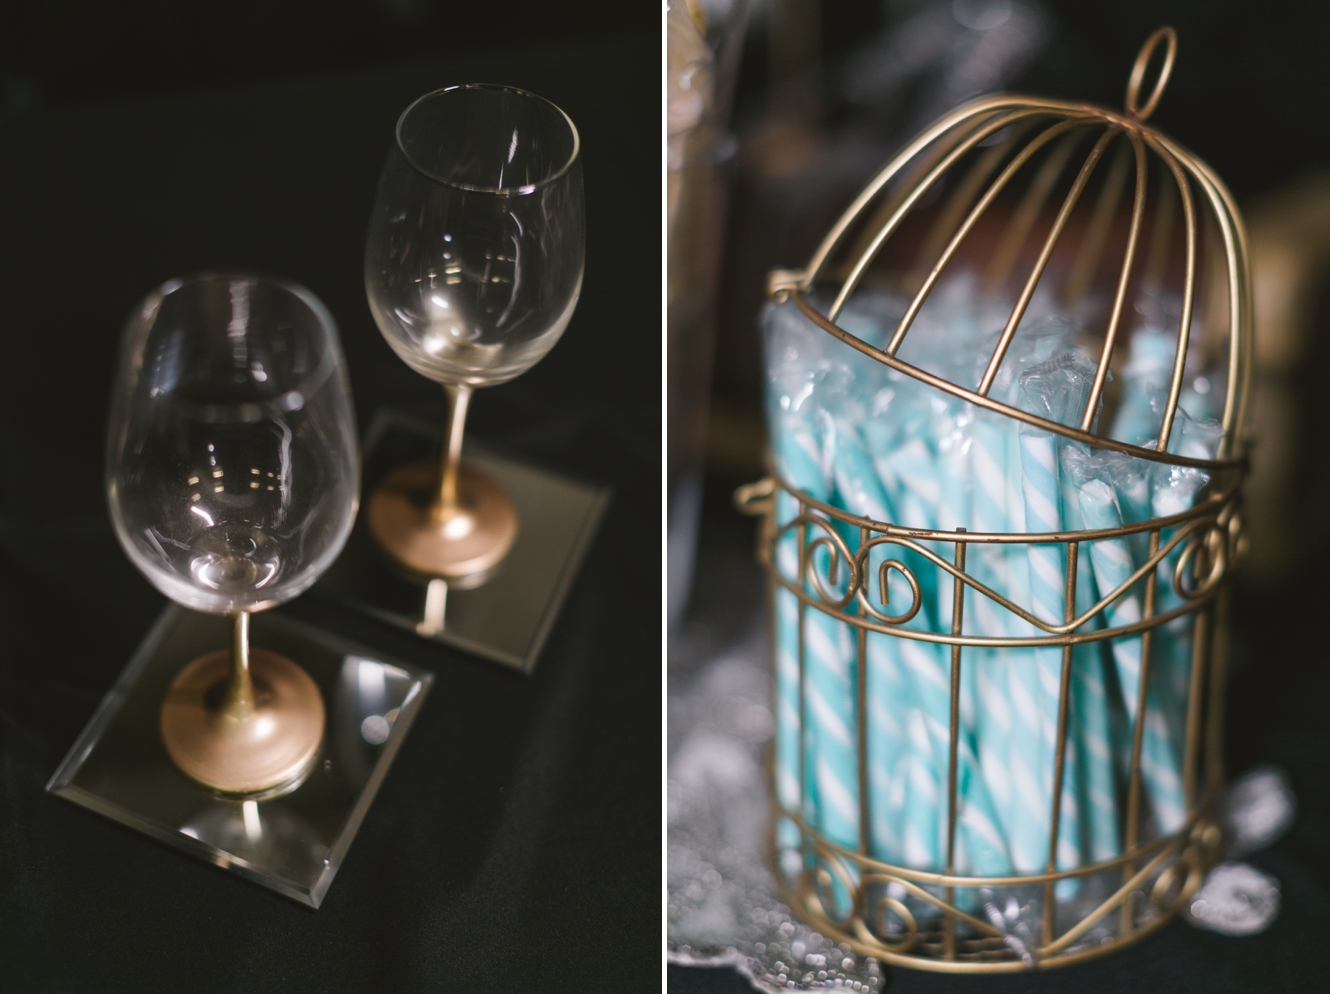 wine glasses dipped in gold and turquoise candy sticks at wedding photo